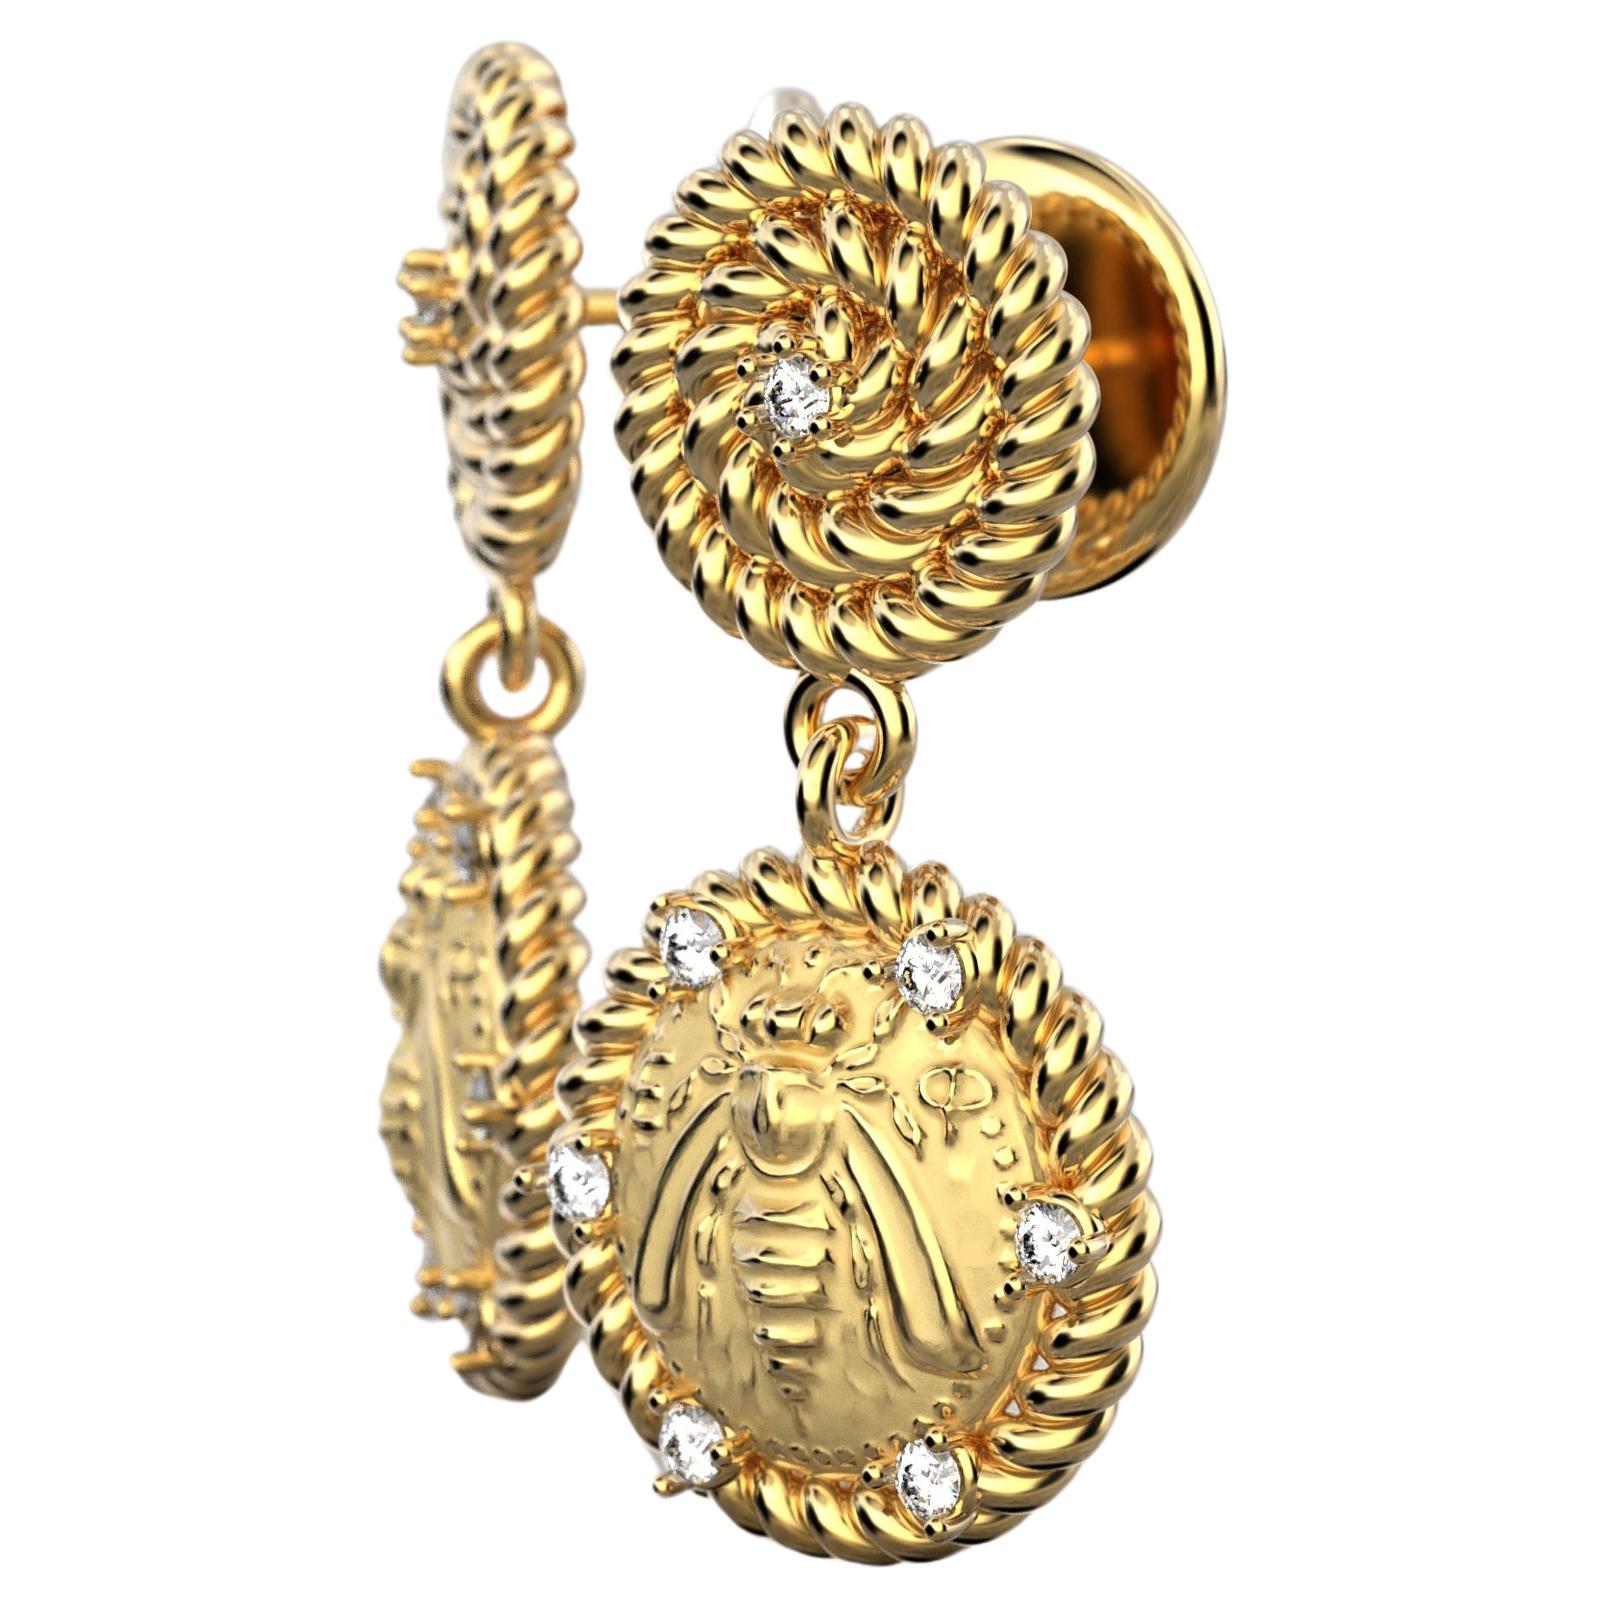 Made to order in 14k Gold and Diamonds.
Adorn yourself with Italian perfection—Diamond Dangle Earrings in 14k solid gold, inspired by Ancient Greek style. Crafted in Italy, these exquisite Bee Coin Earrings fuse history with modern elegance. Elevate